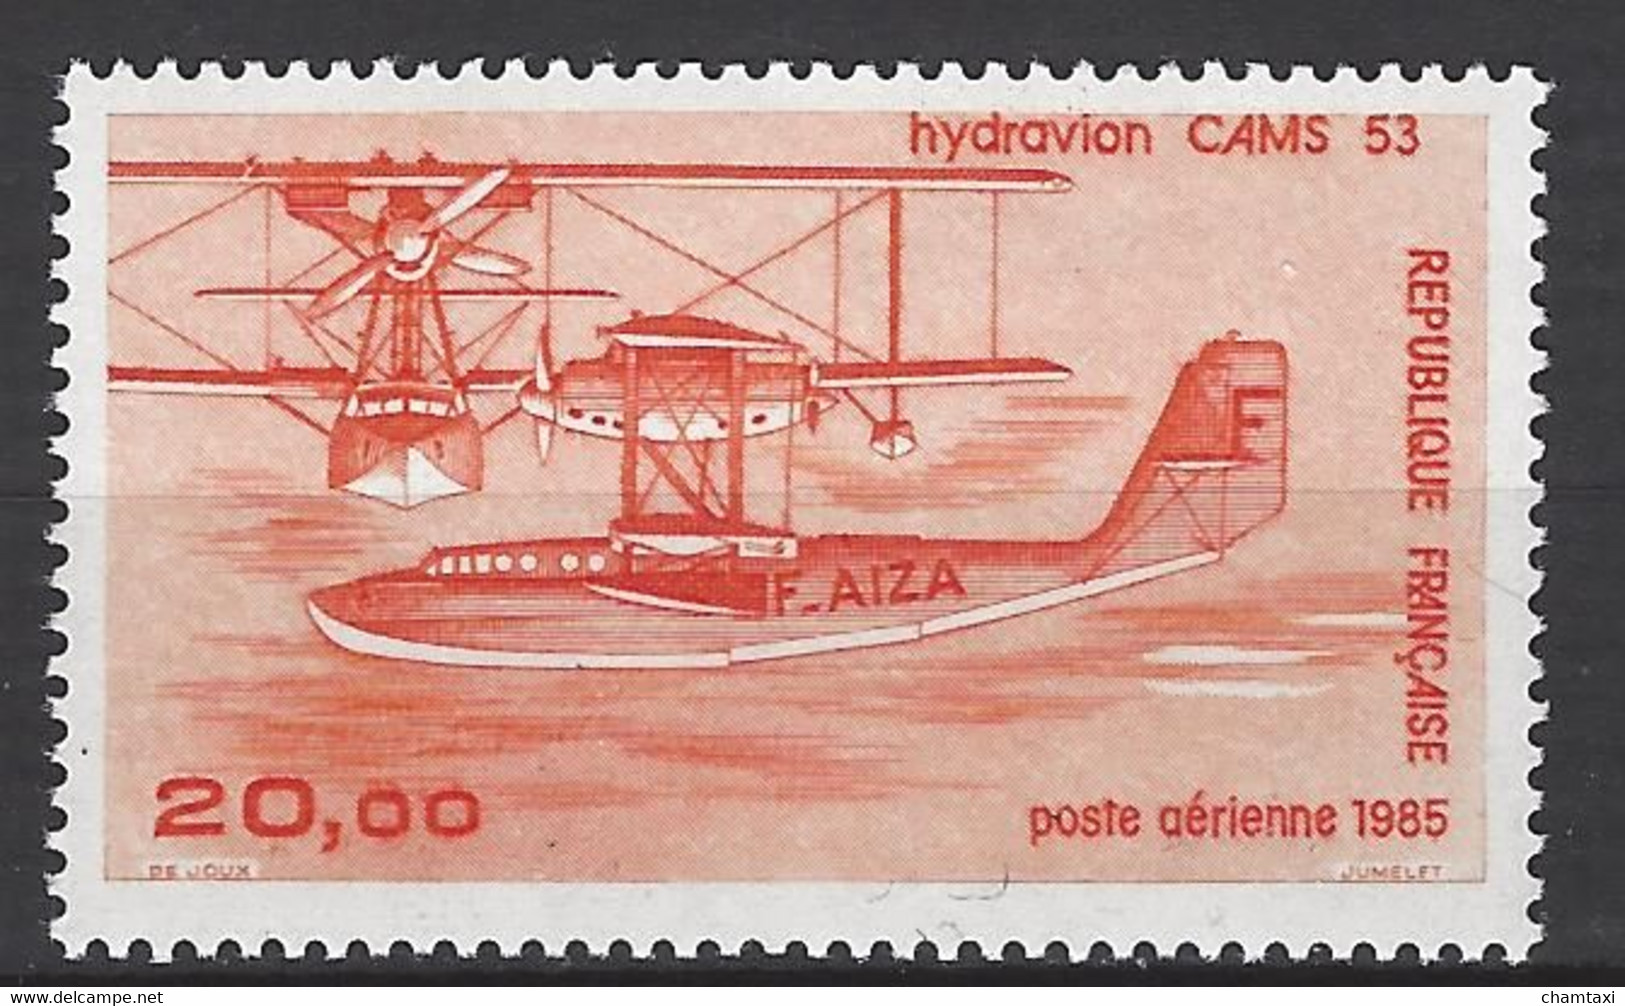 FRANCE 1895 TIMBRE POSTE AERIENNE 58b HYDRAVION CAMS 53 - Luftpost